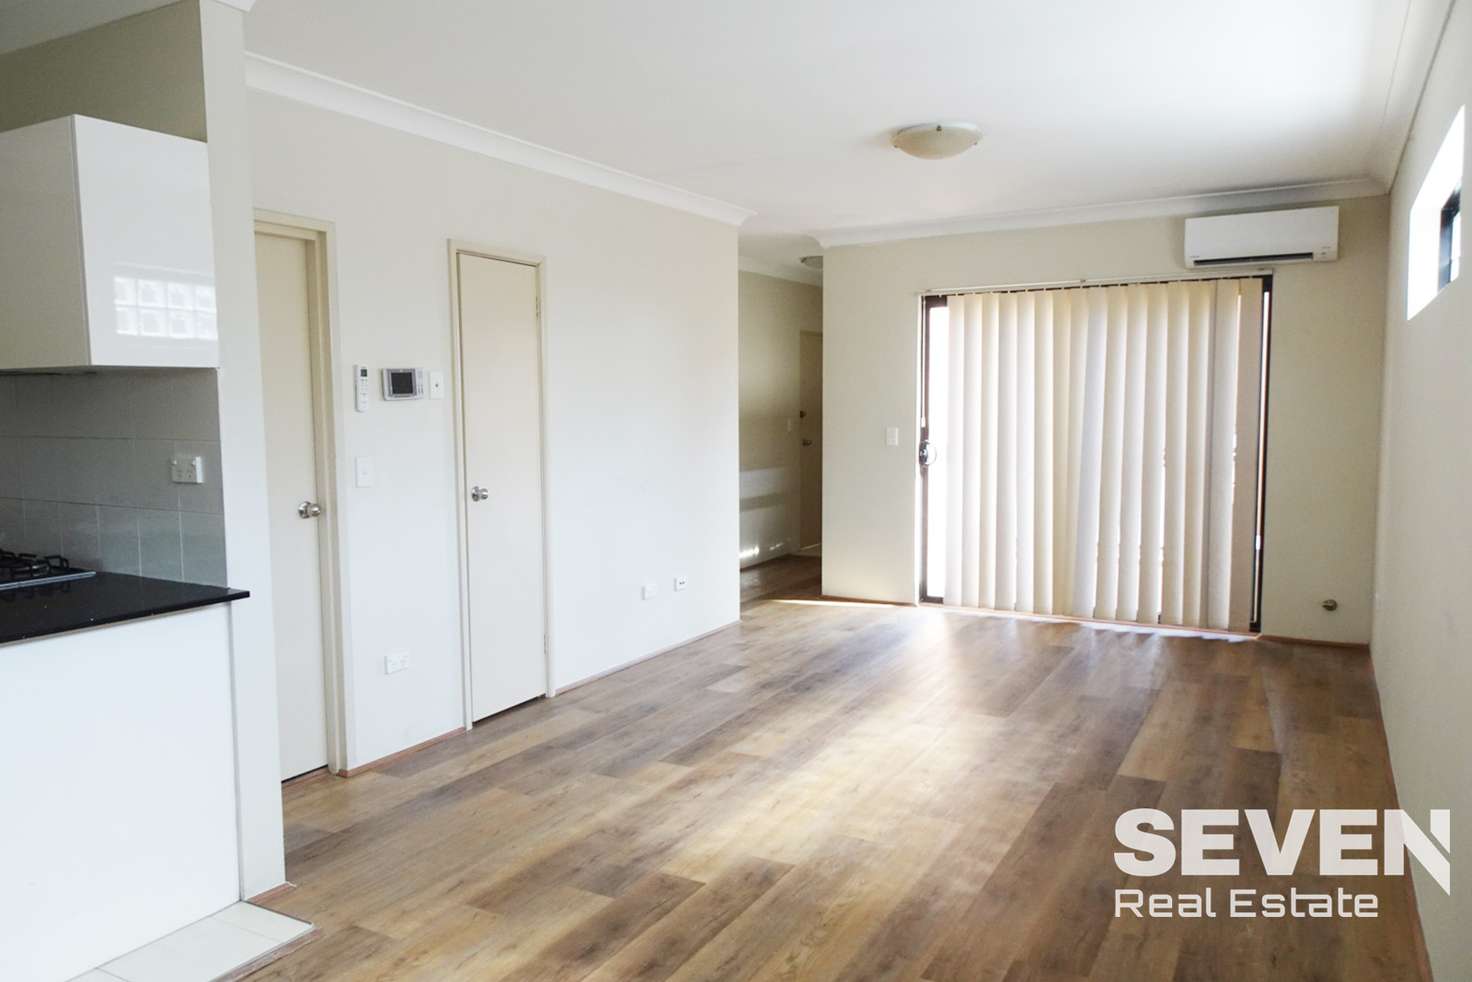 Main view of Homely apartment listing, 6/159 Wellington Road, Sefton NSW 2162